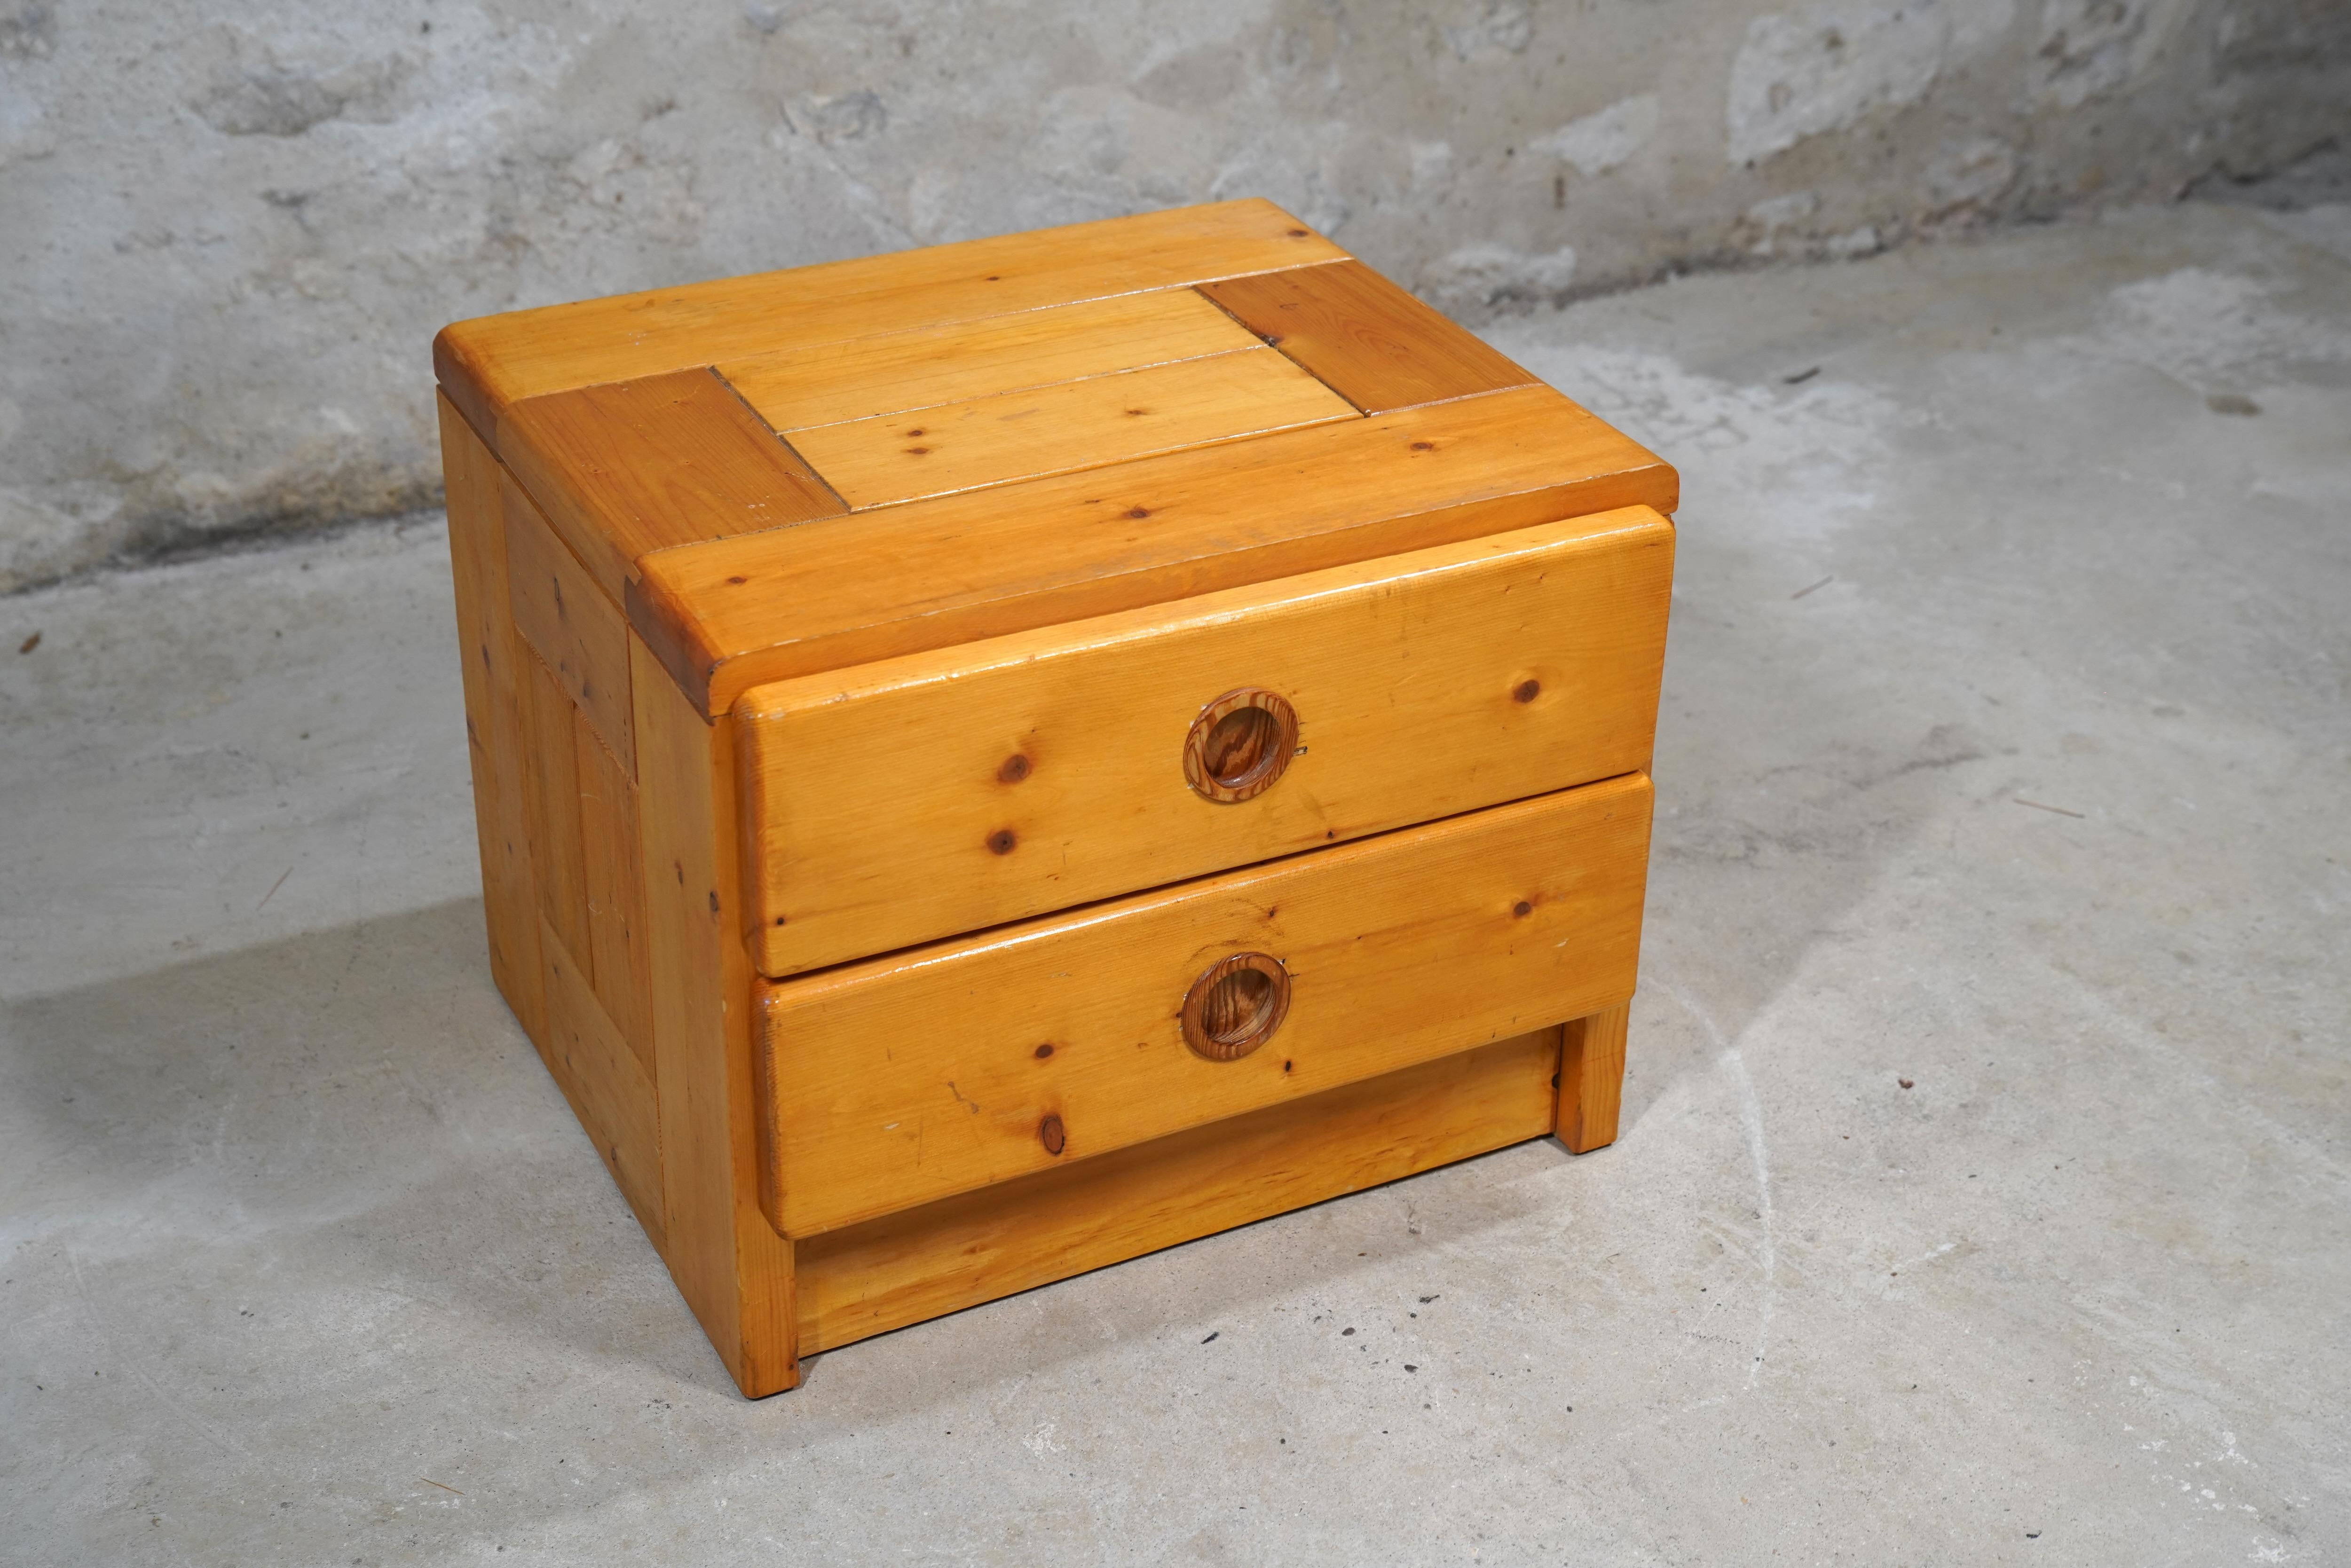 Pine Charlotte Perriand Night Stand from Les Arcs in Savoie, France c. 1970 For Sale